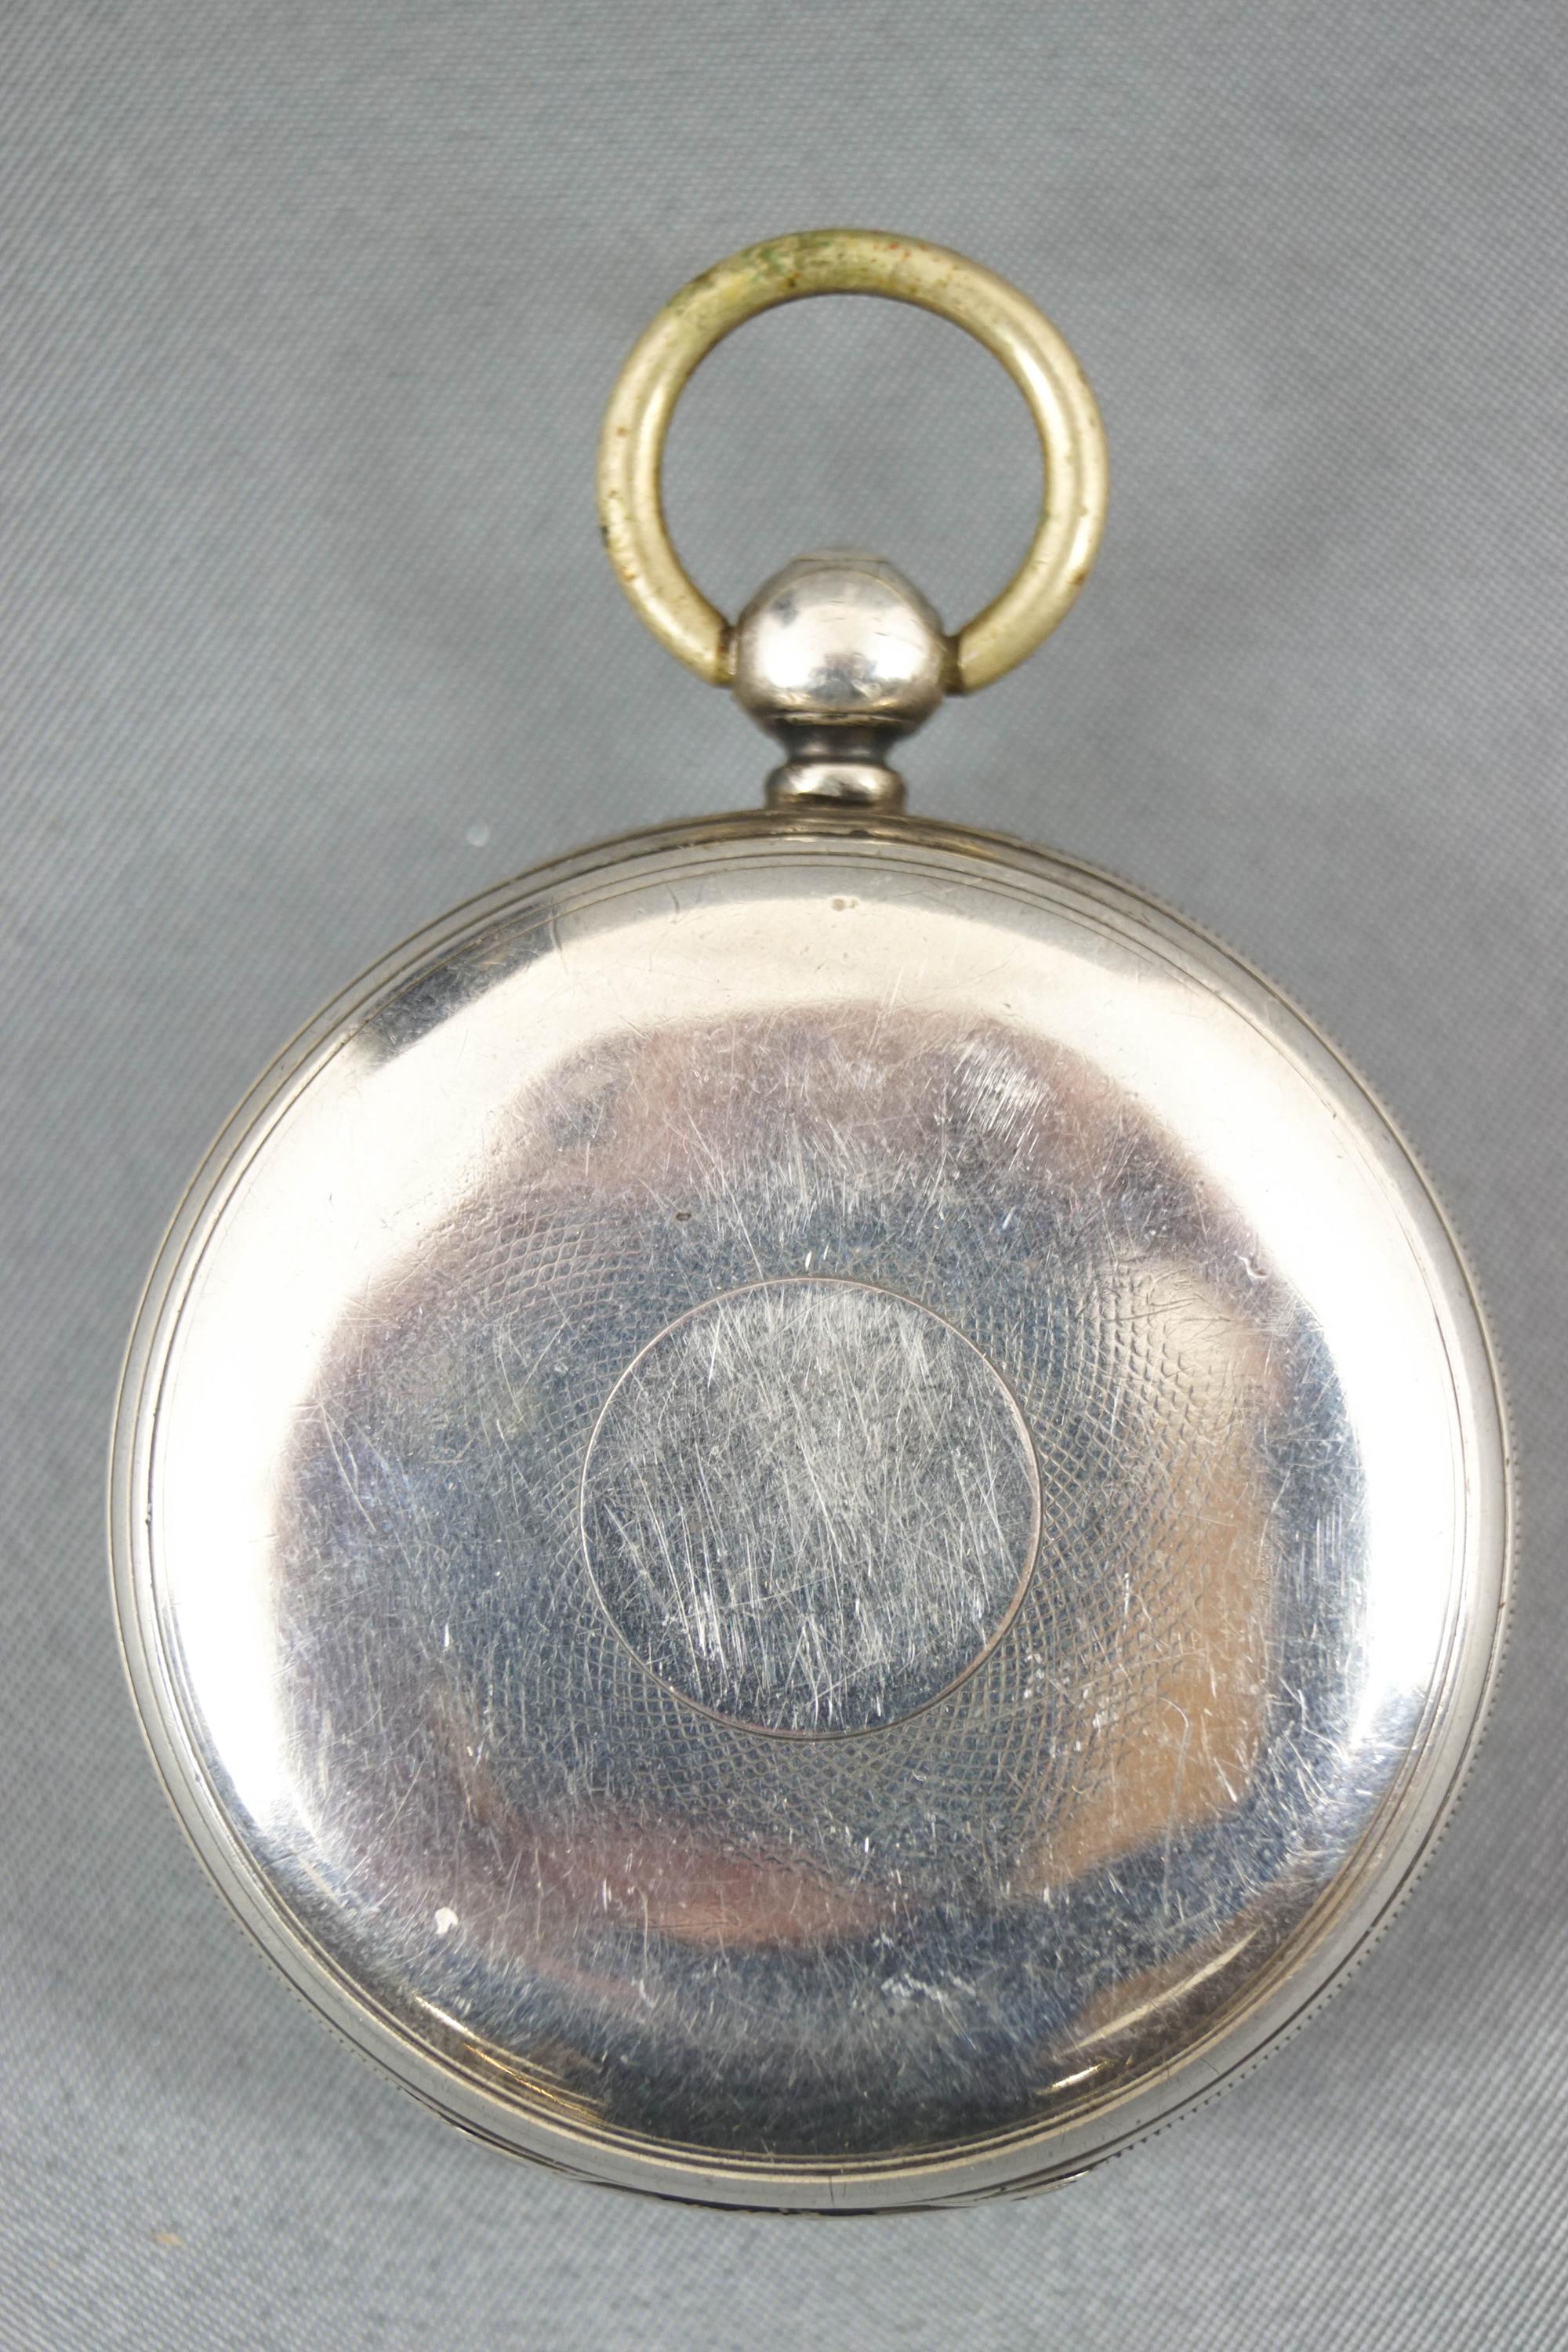 A Straub & Hebting boro' open face pocket watch. - Image 2 of 3